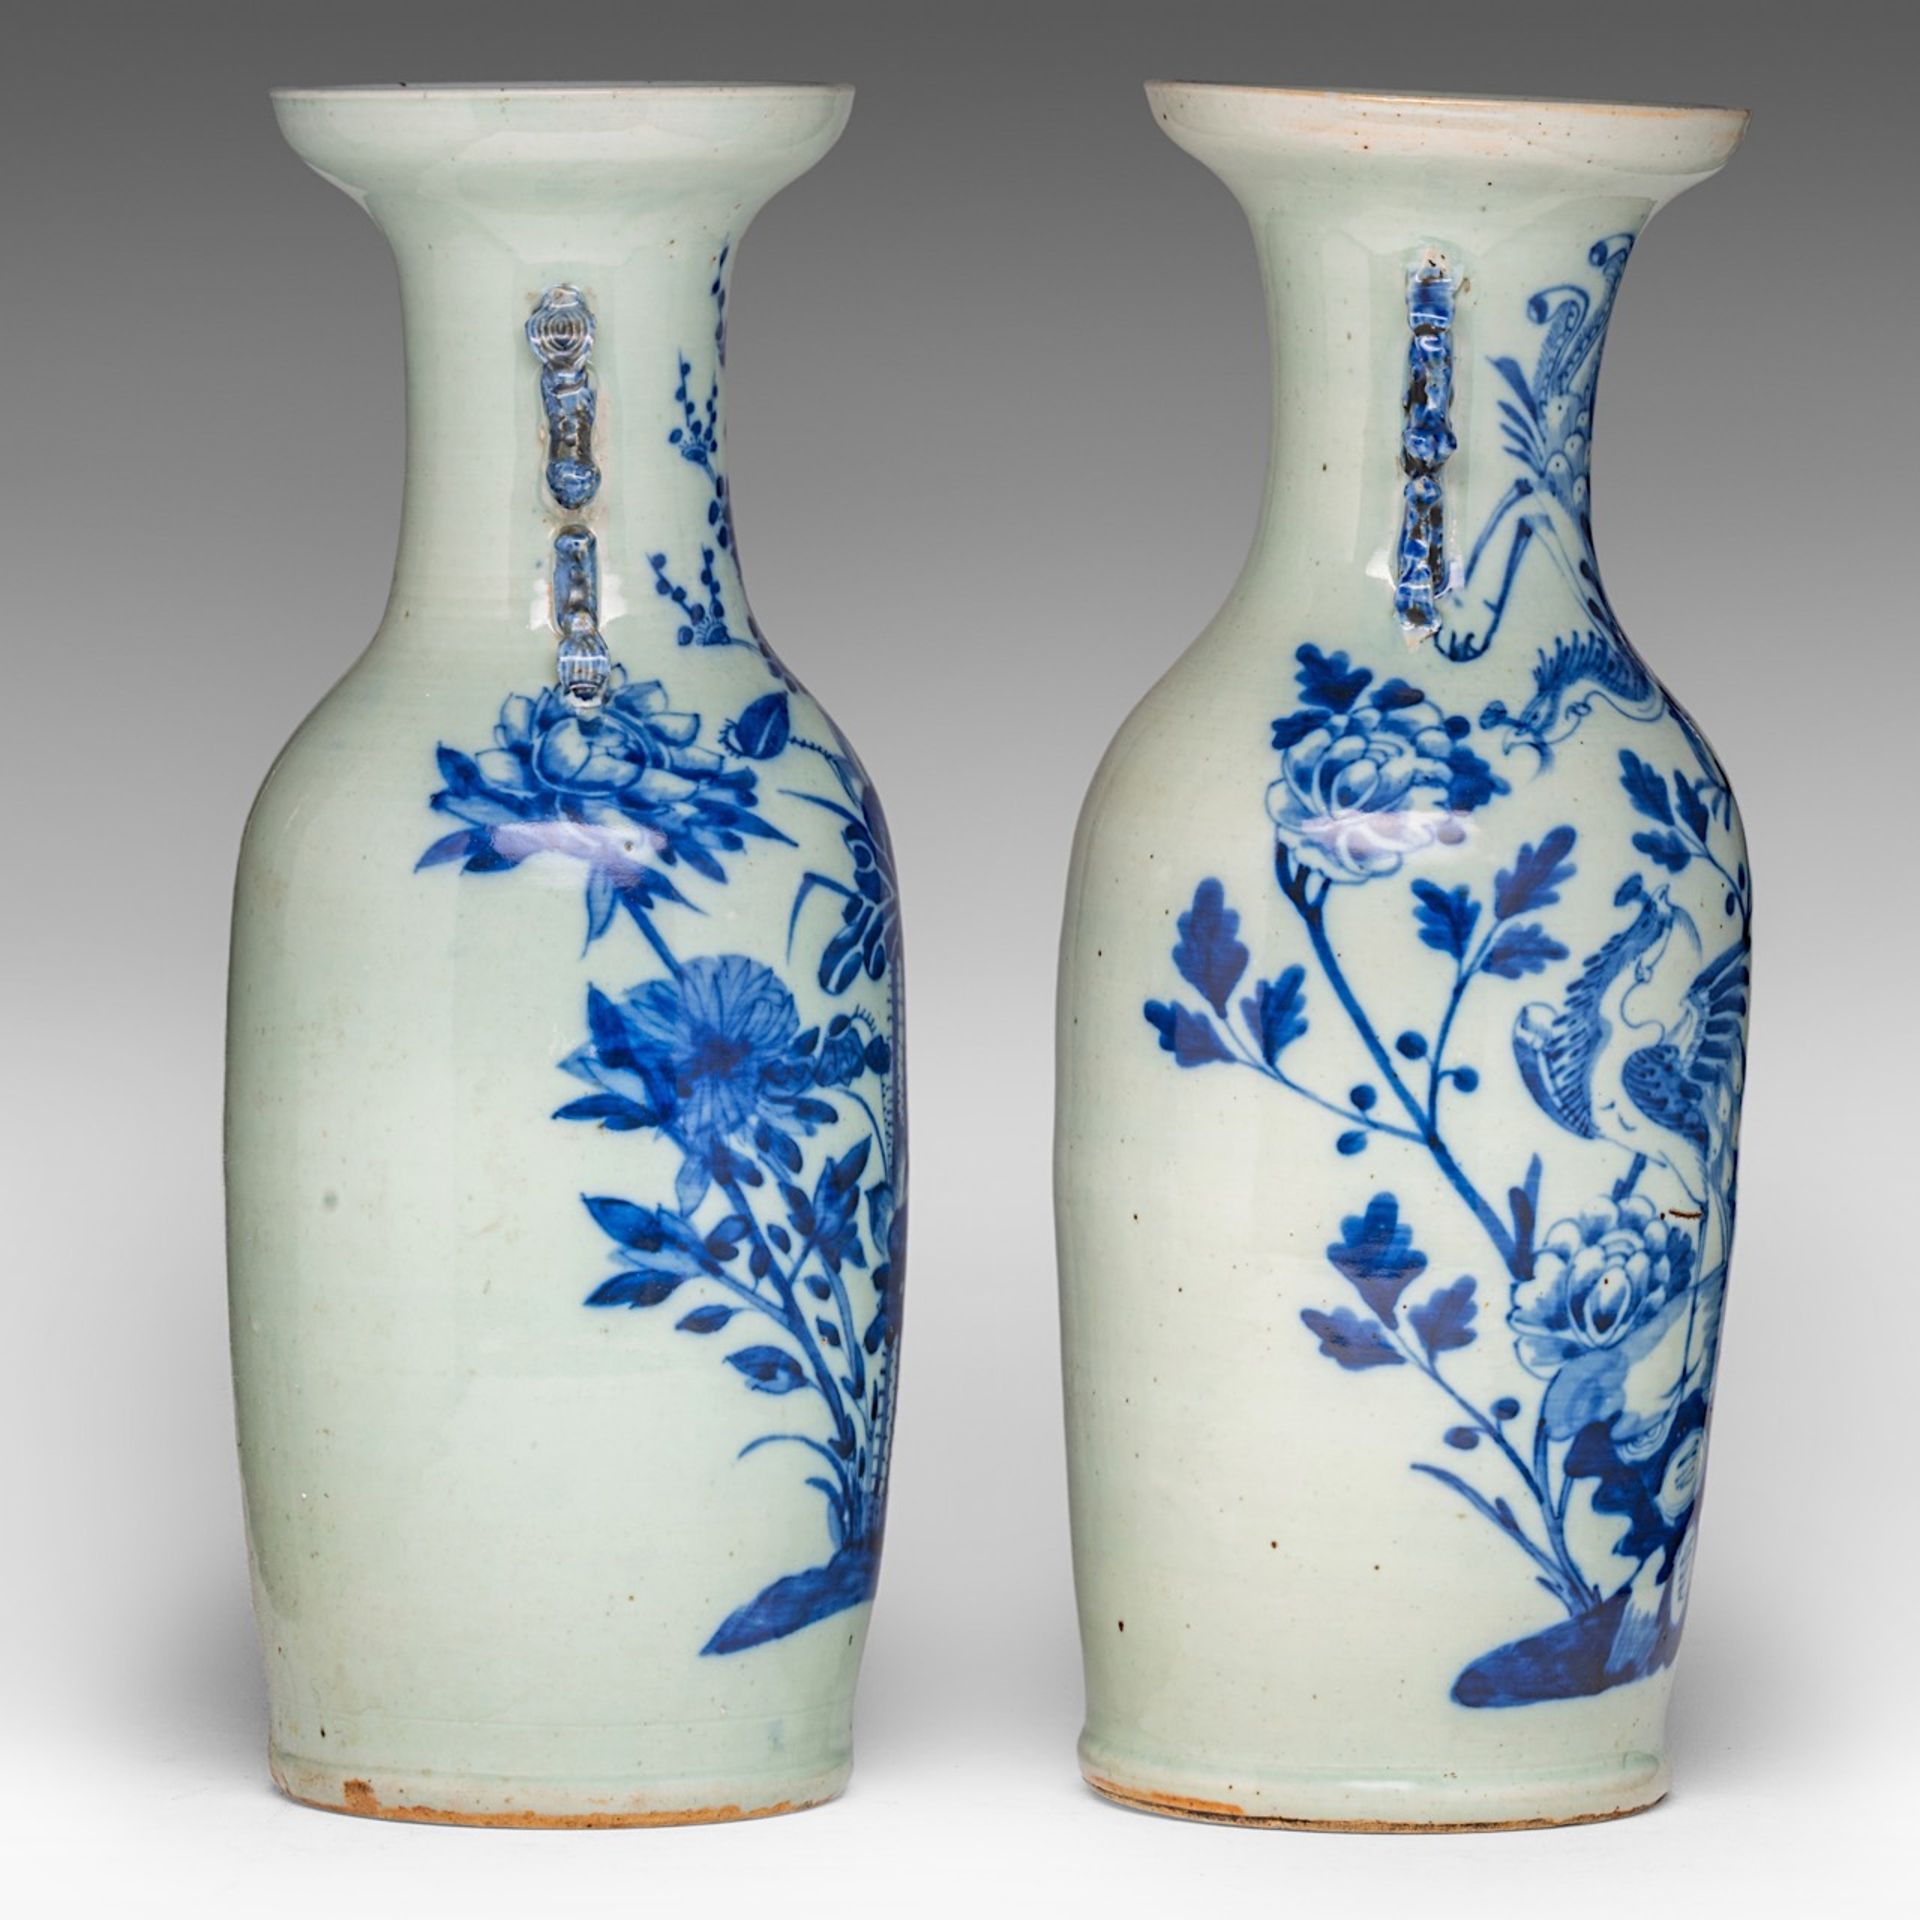 Four Chinese blue and white on celadon ground 'Flowers and birds' vases, late 19thC, H 57 - 58 cm - Image 5 of 13